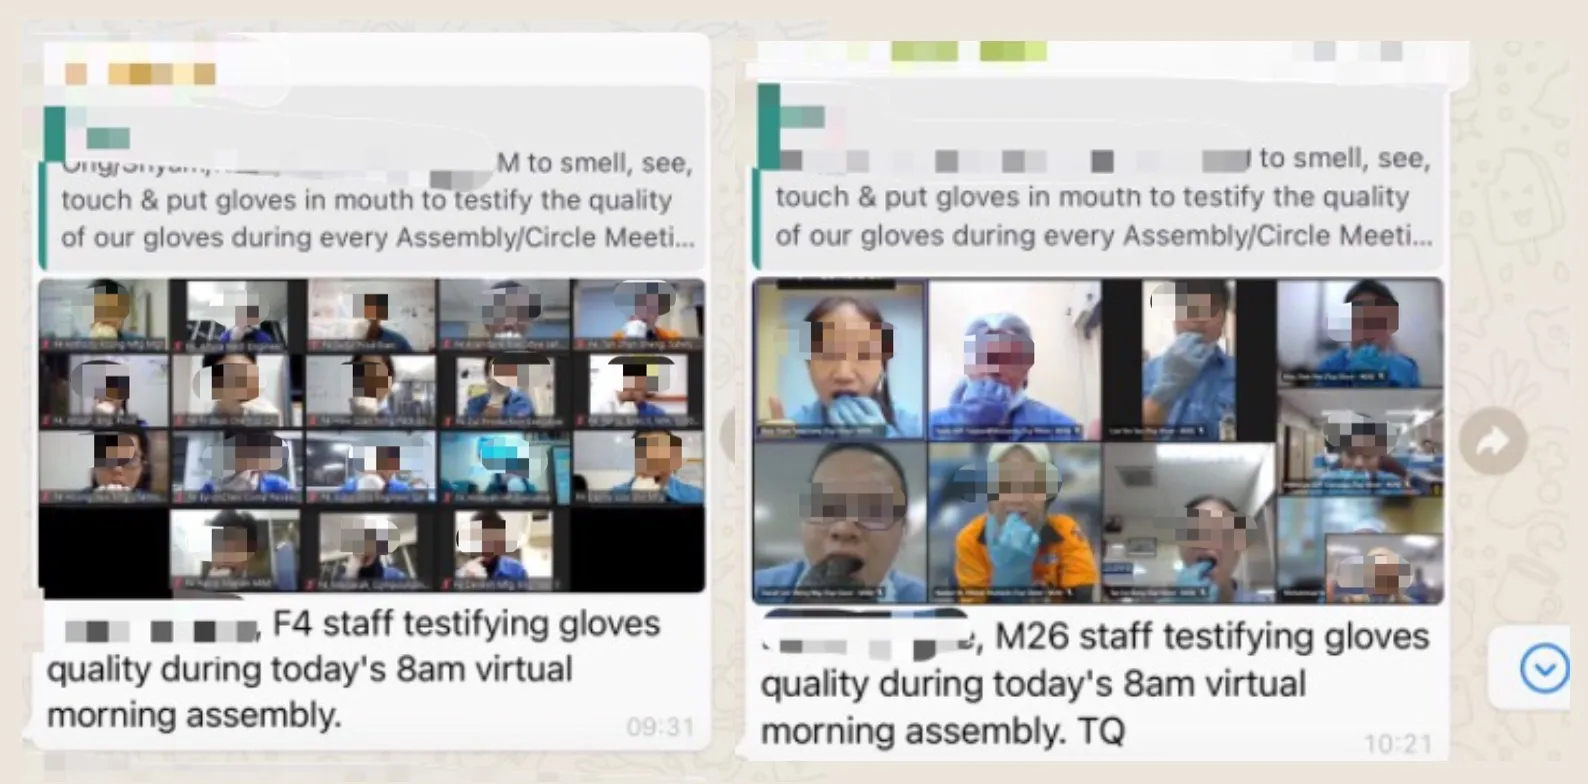 Whatsapp message screenshots of employees putting gloves in mouth.